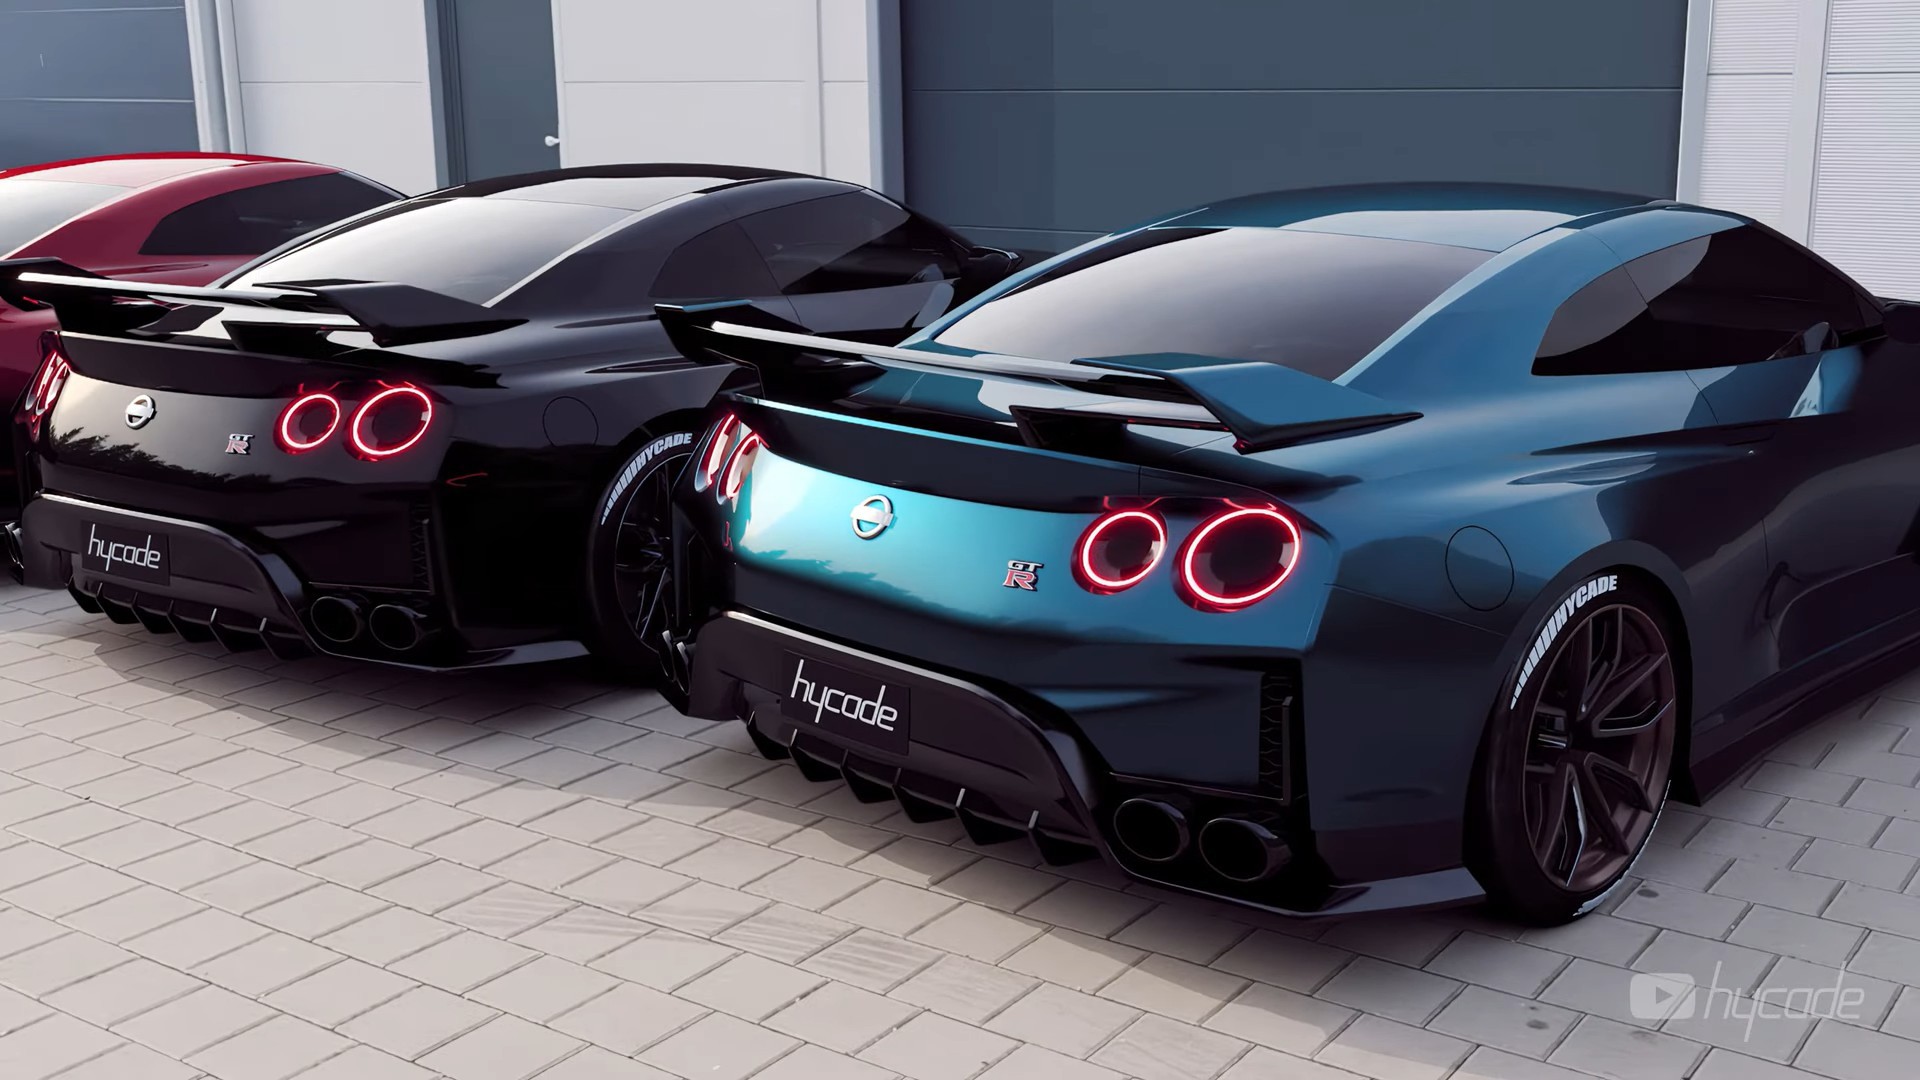 Pack of Digital R36 Nissan GT-R Supercars Dwell Around Flaunting